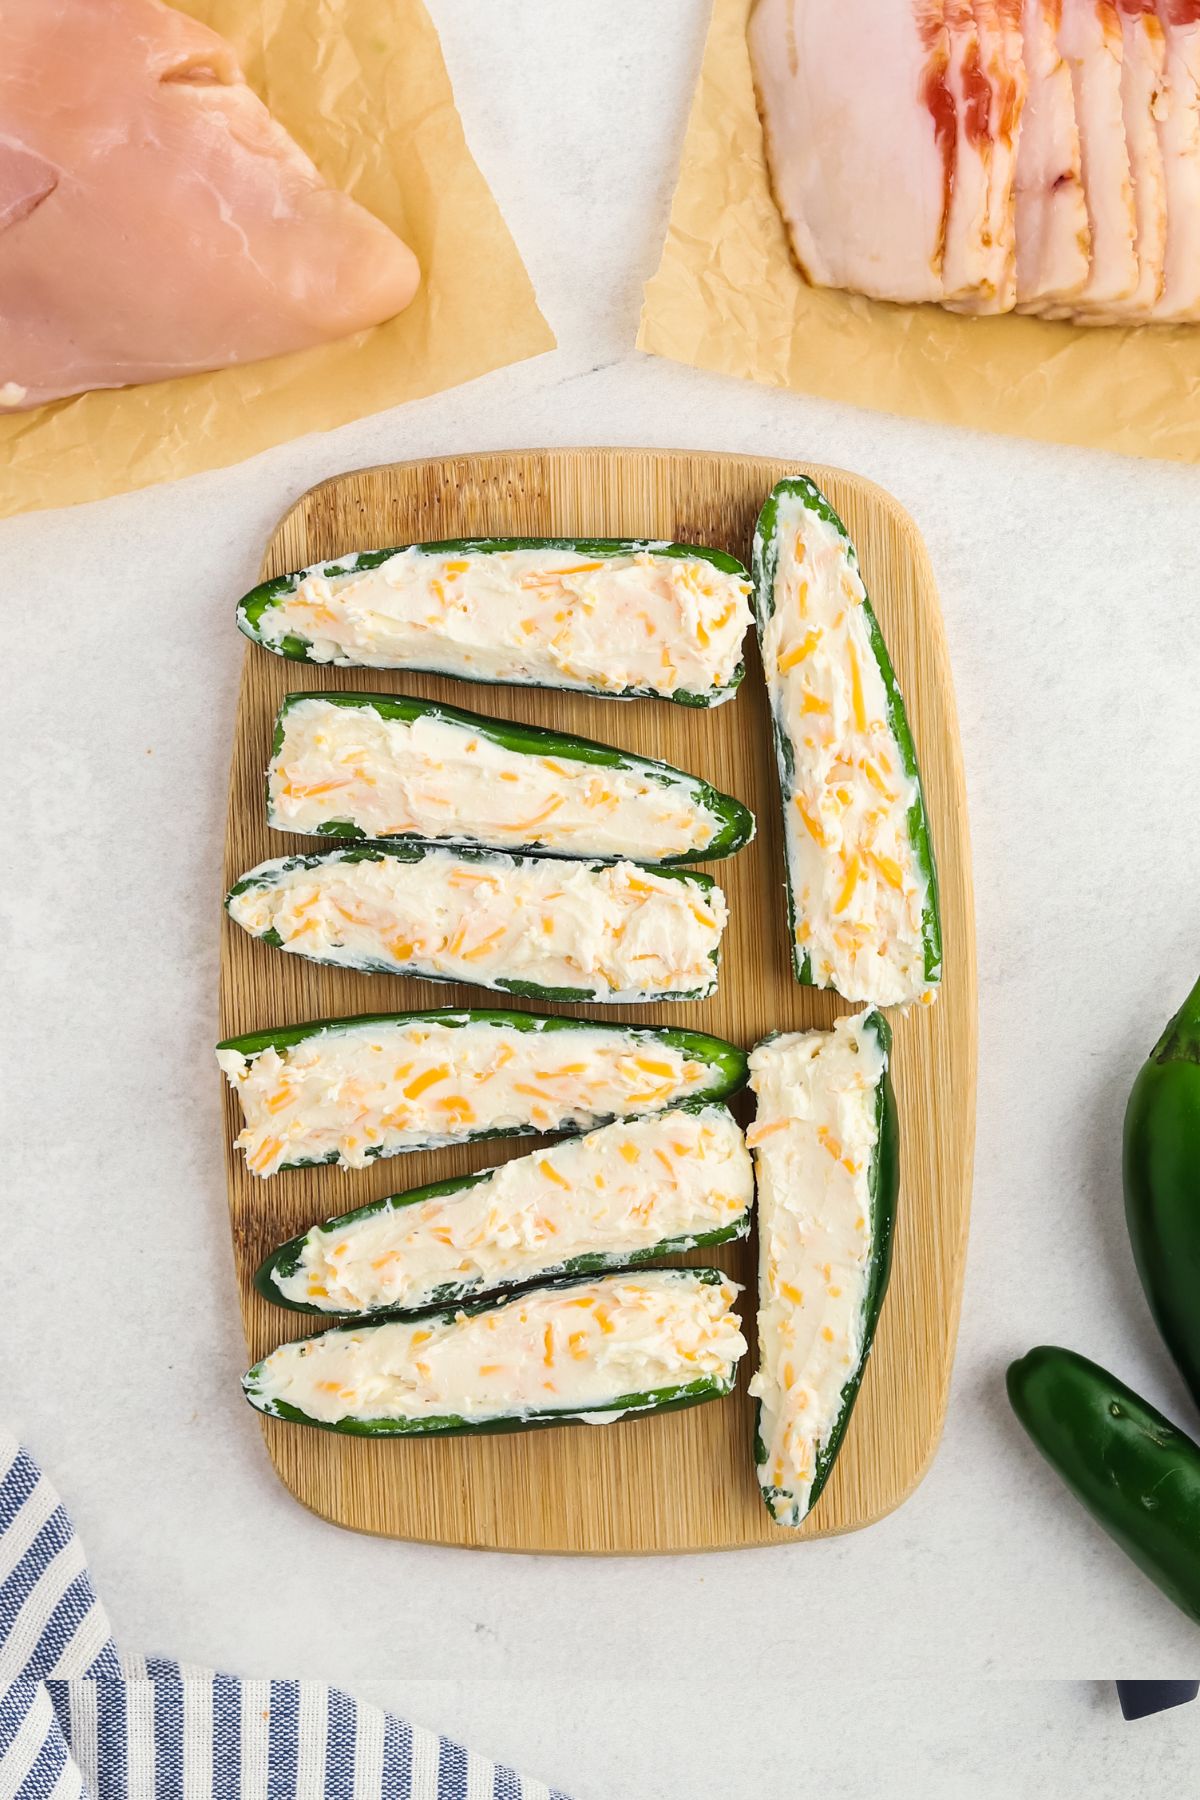 Jalapenos sliced in half then filled with cheese mixture